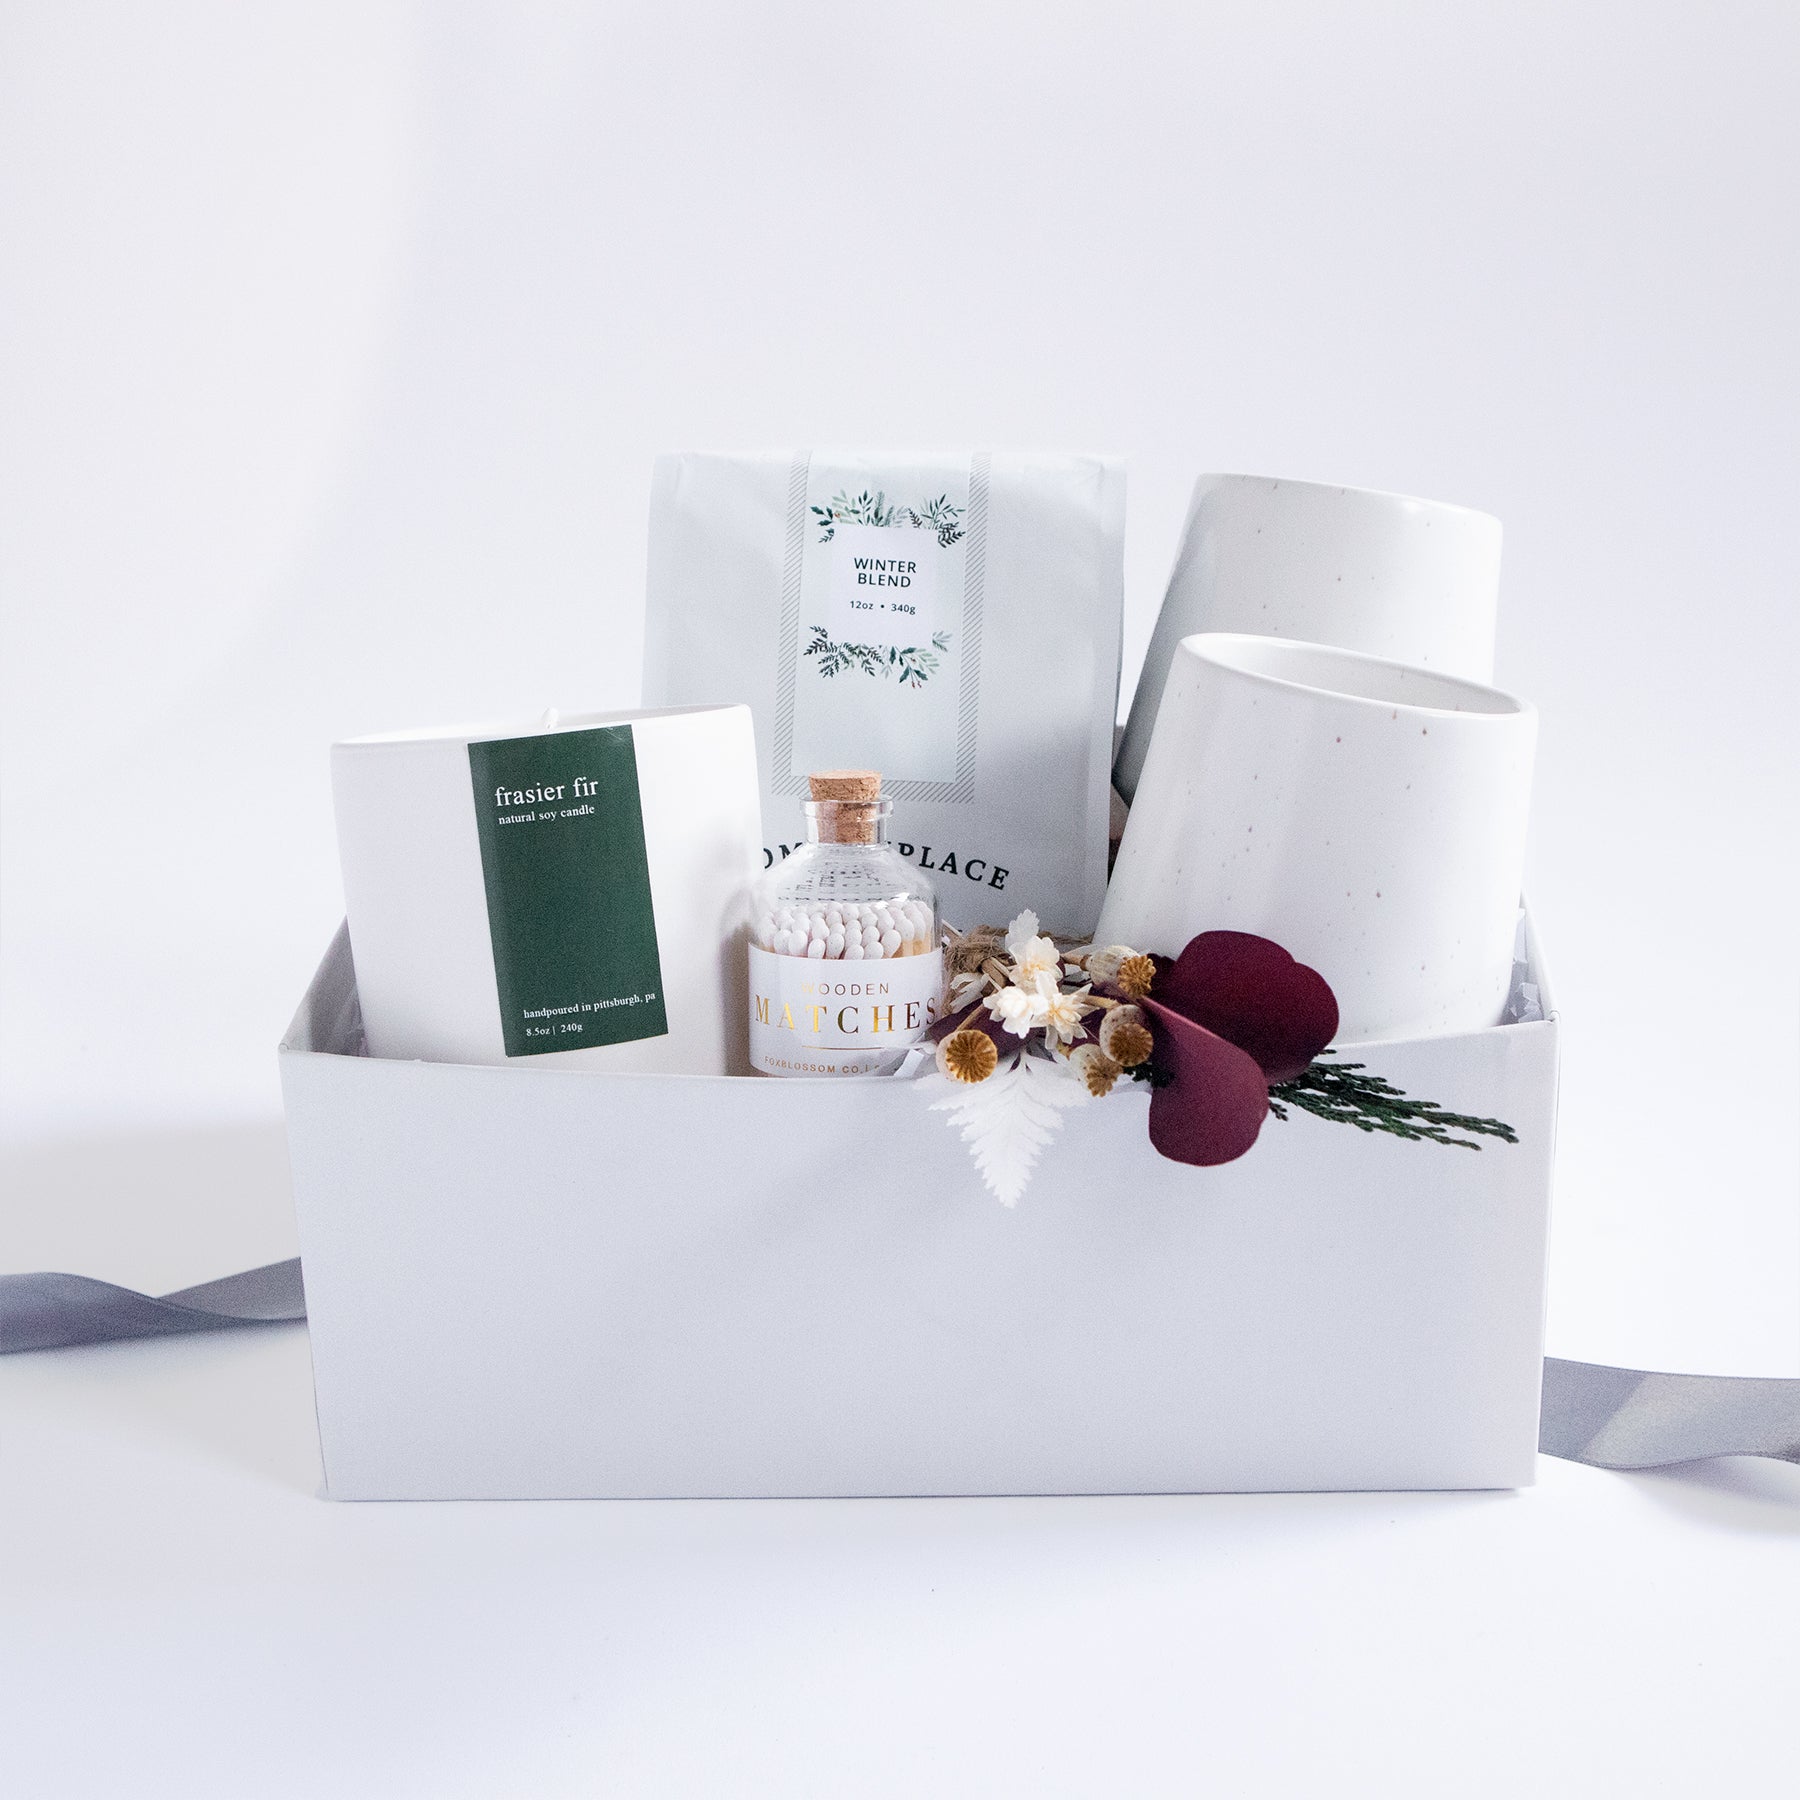 Curated Gift Boxes, Holiday Gift Boxes, Relax and Restore Gift, Pamper Spa Gifts, Tea Time Gift Box, Build a Gift Box, Corporate Gifts, Client Gifting, Holiday Coffee Gift Basket